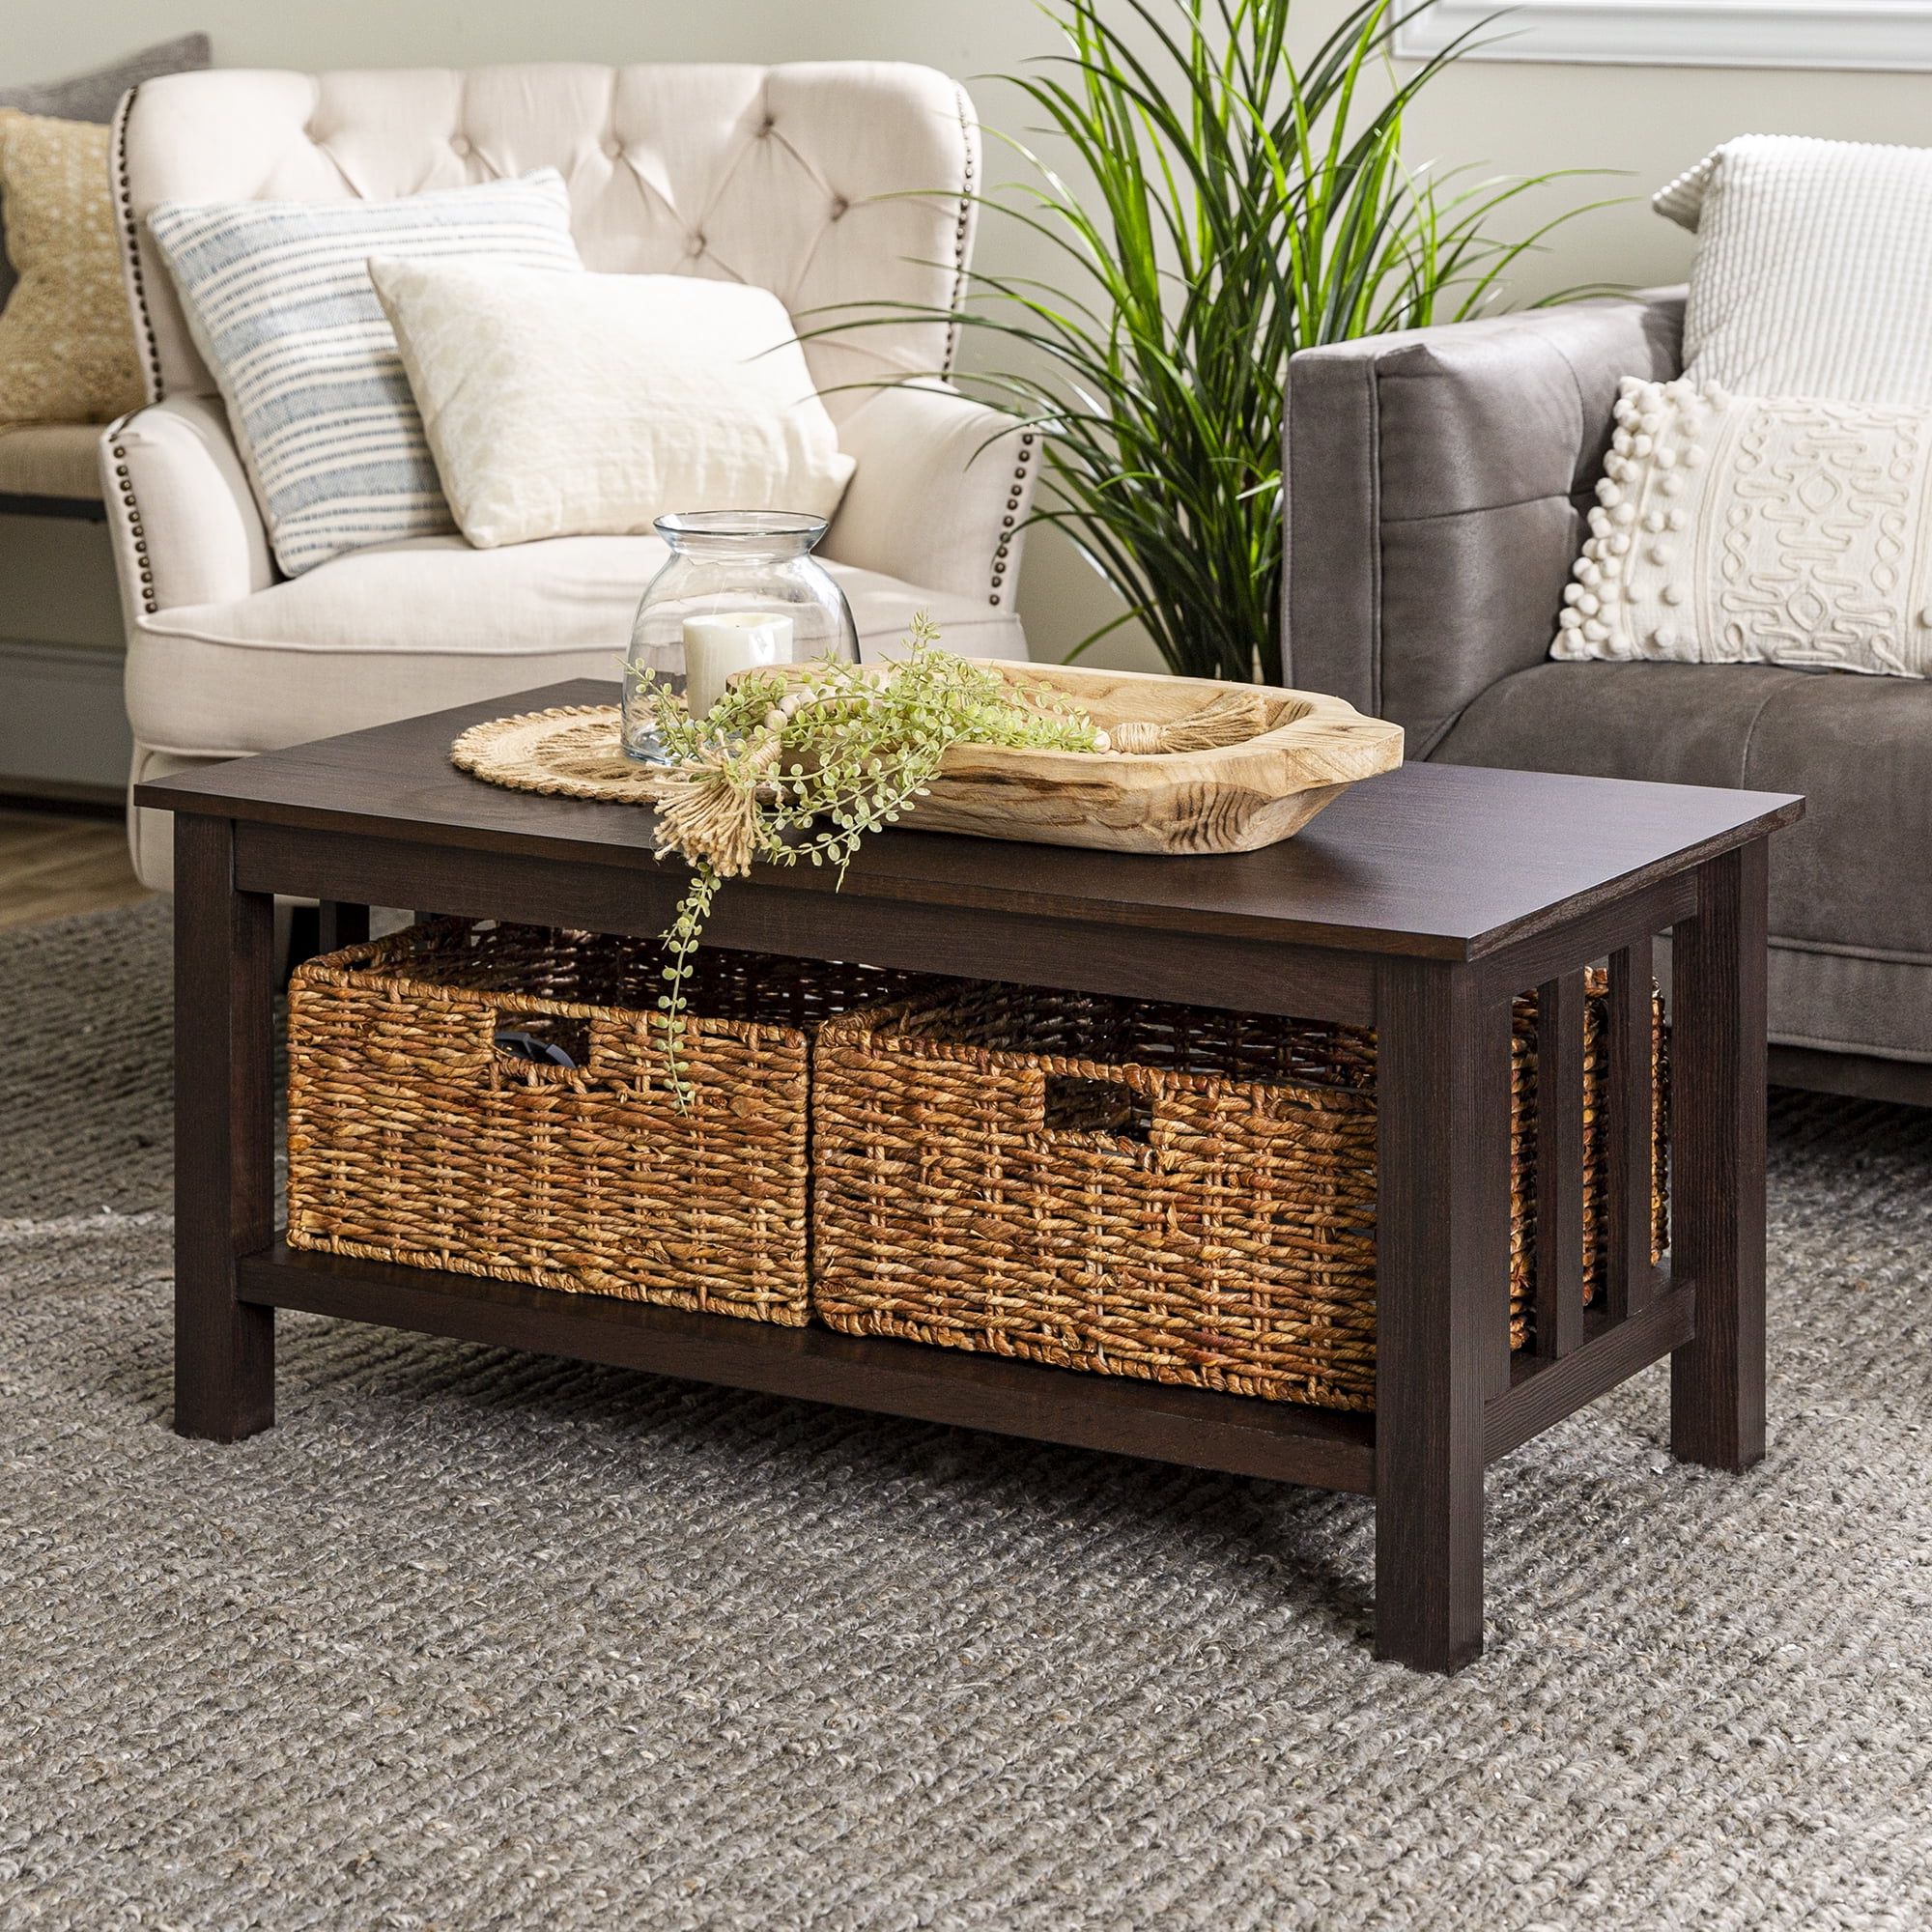 2020 Woven Paths Coffee Tables Within Woven Paths Traditional Storage Coffee Table With Bins, Espresso (View 5 of 15)